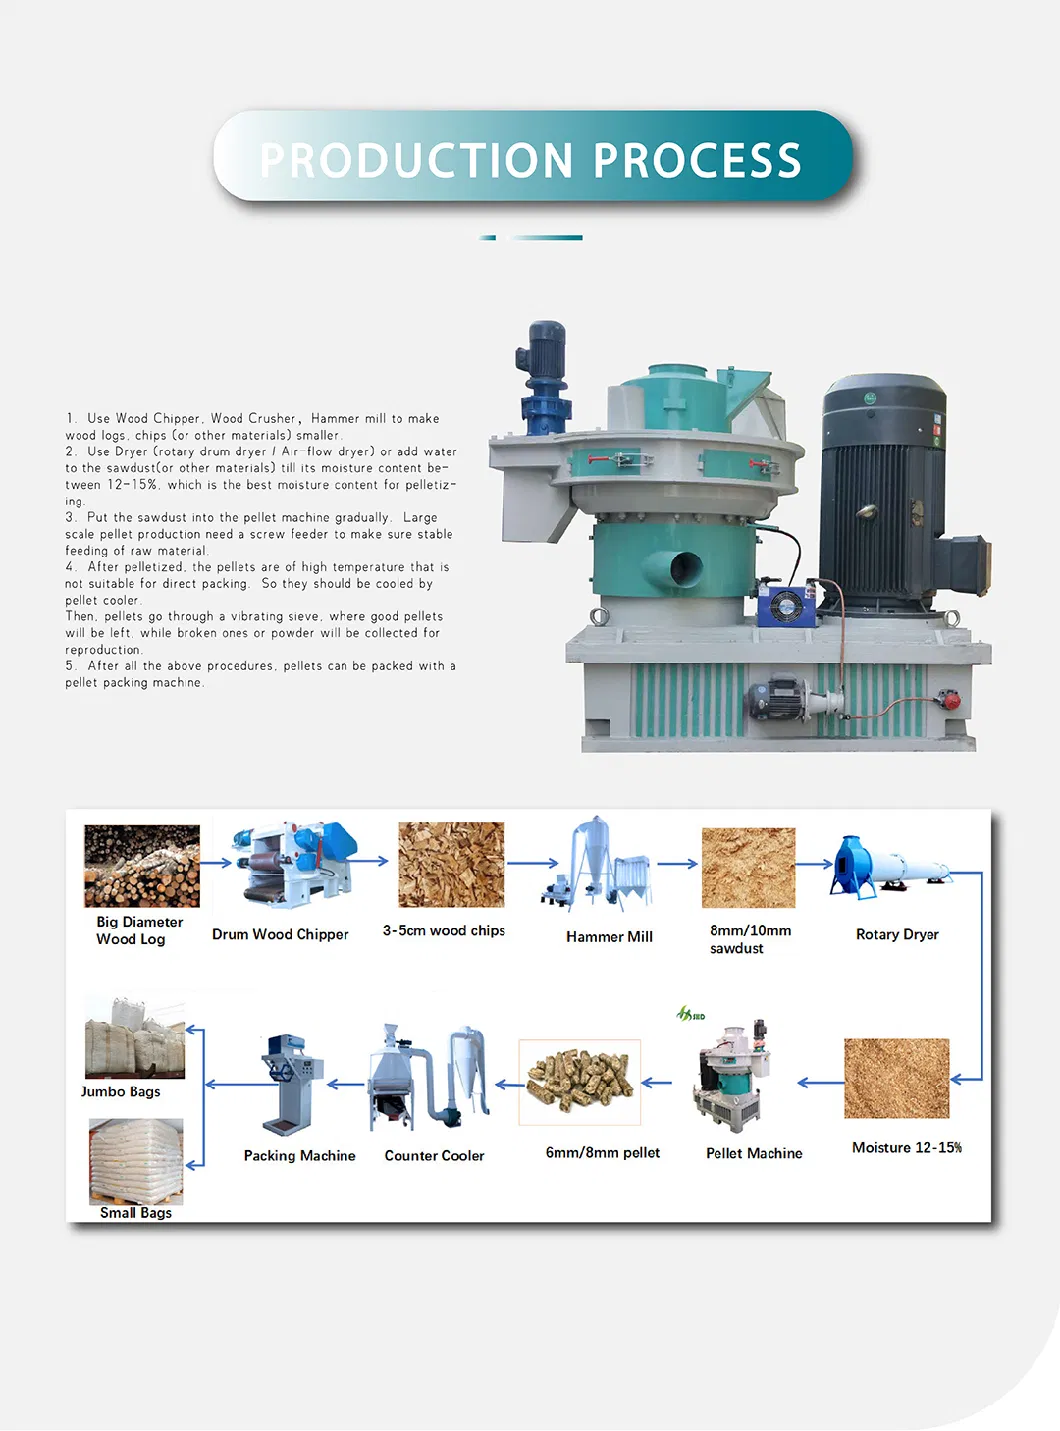 Shd Complete Wood Pellet Mill with Various Capacities Wooden Pellets Making Machine